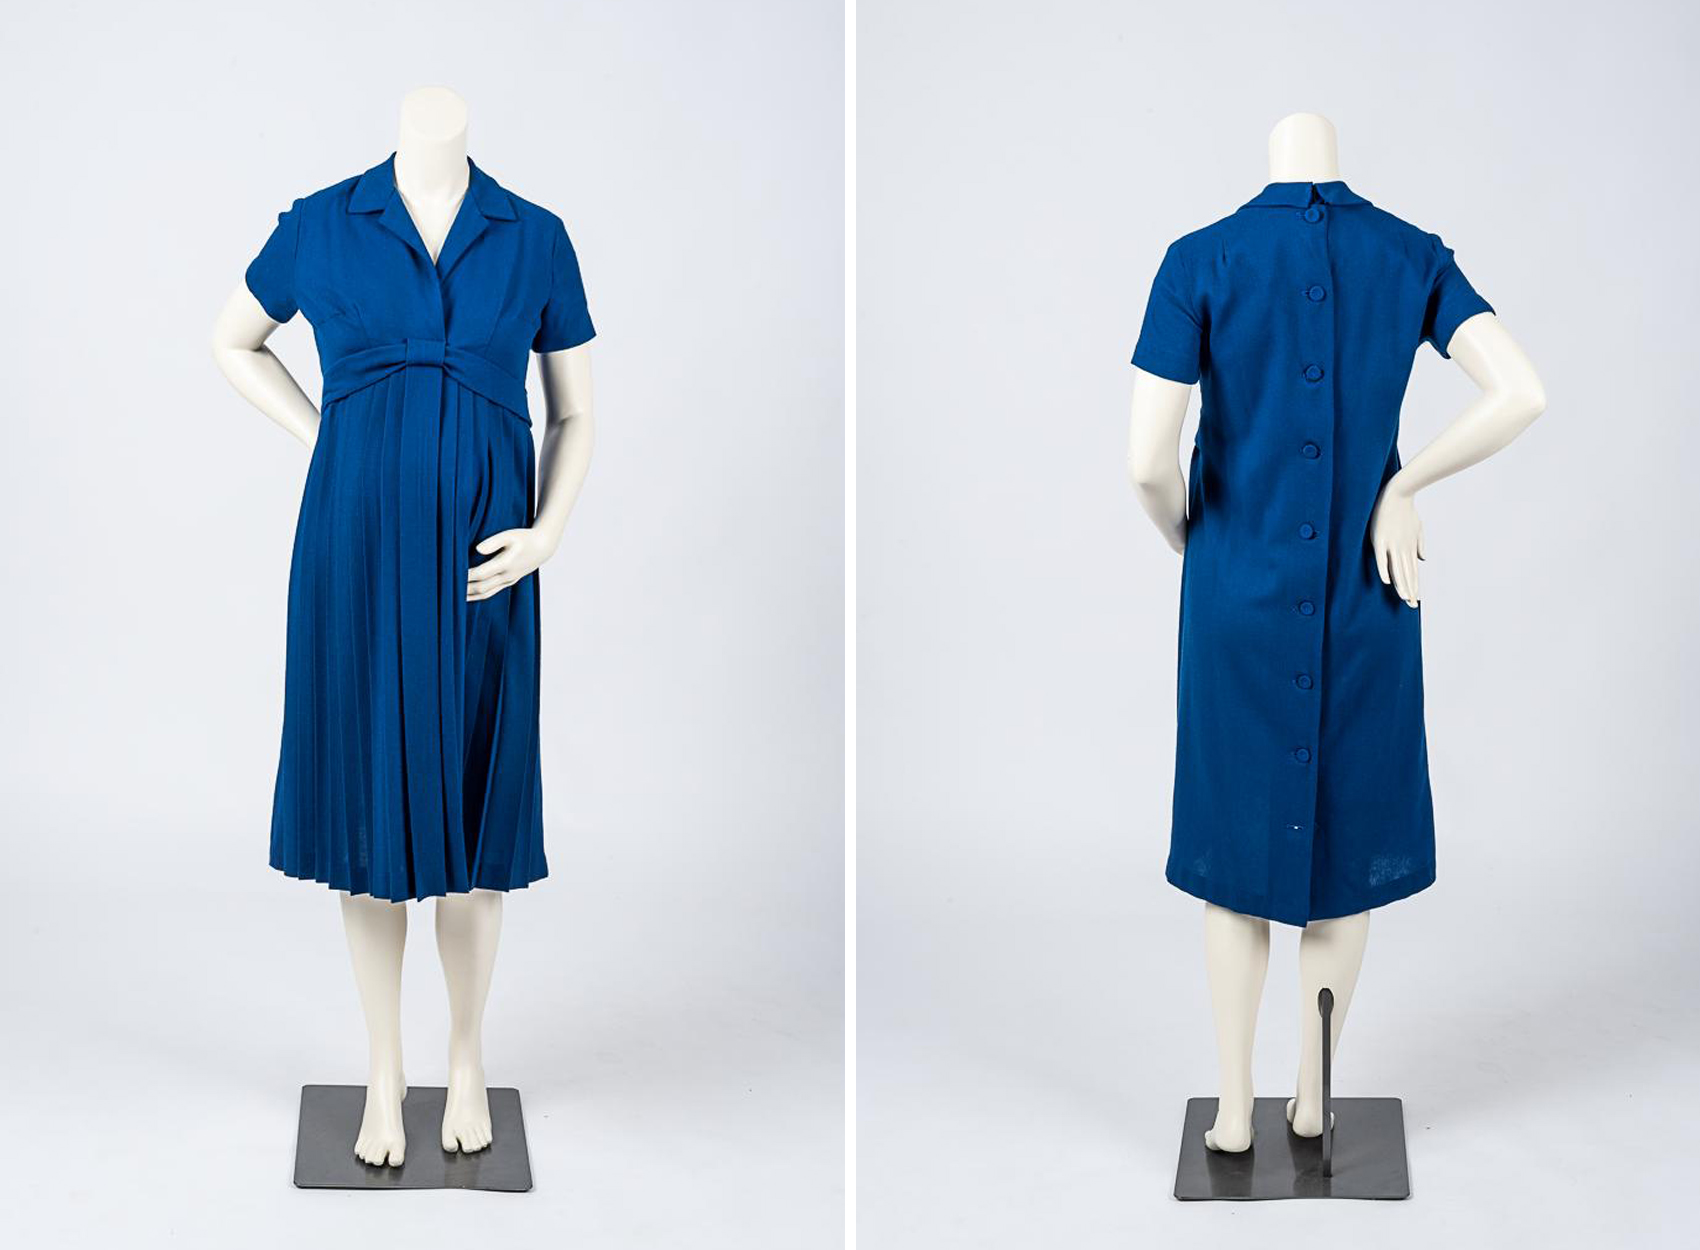 The front and rear view of a mannequin wearing an elegant maternity dress of blue wool